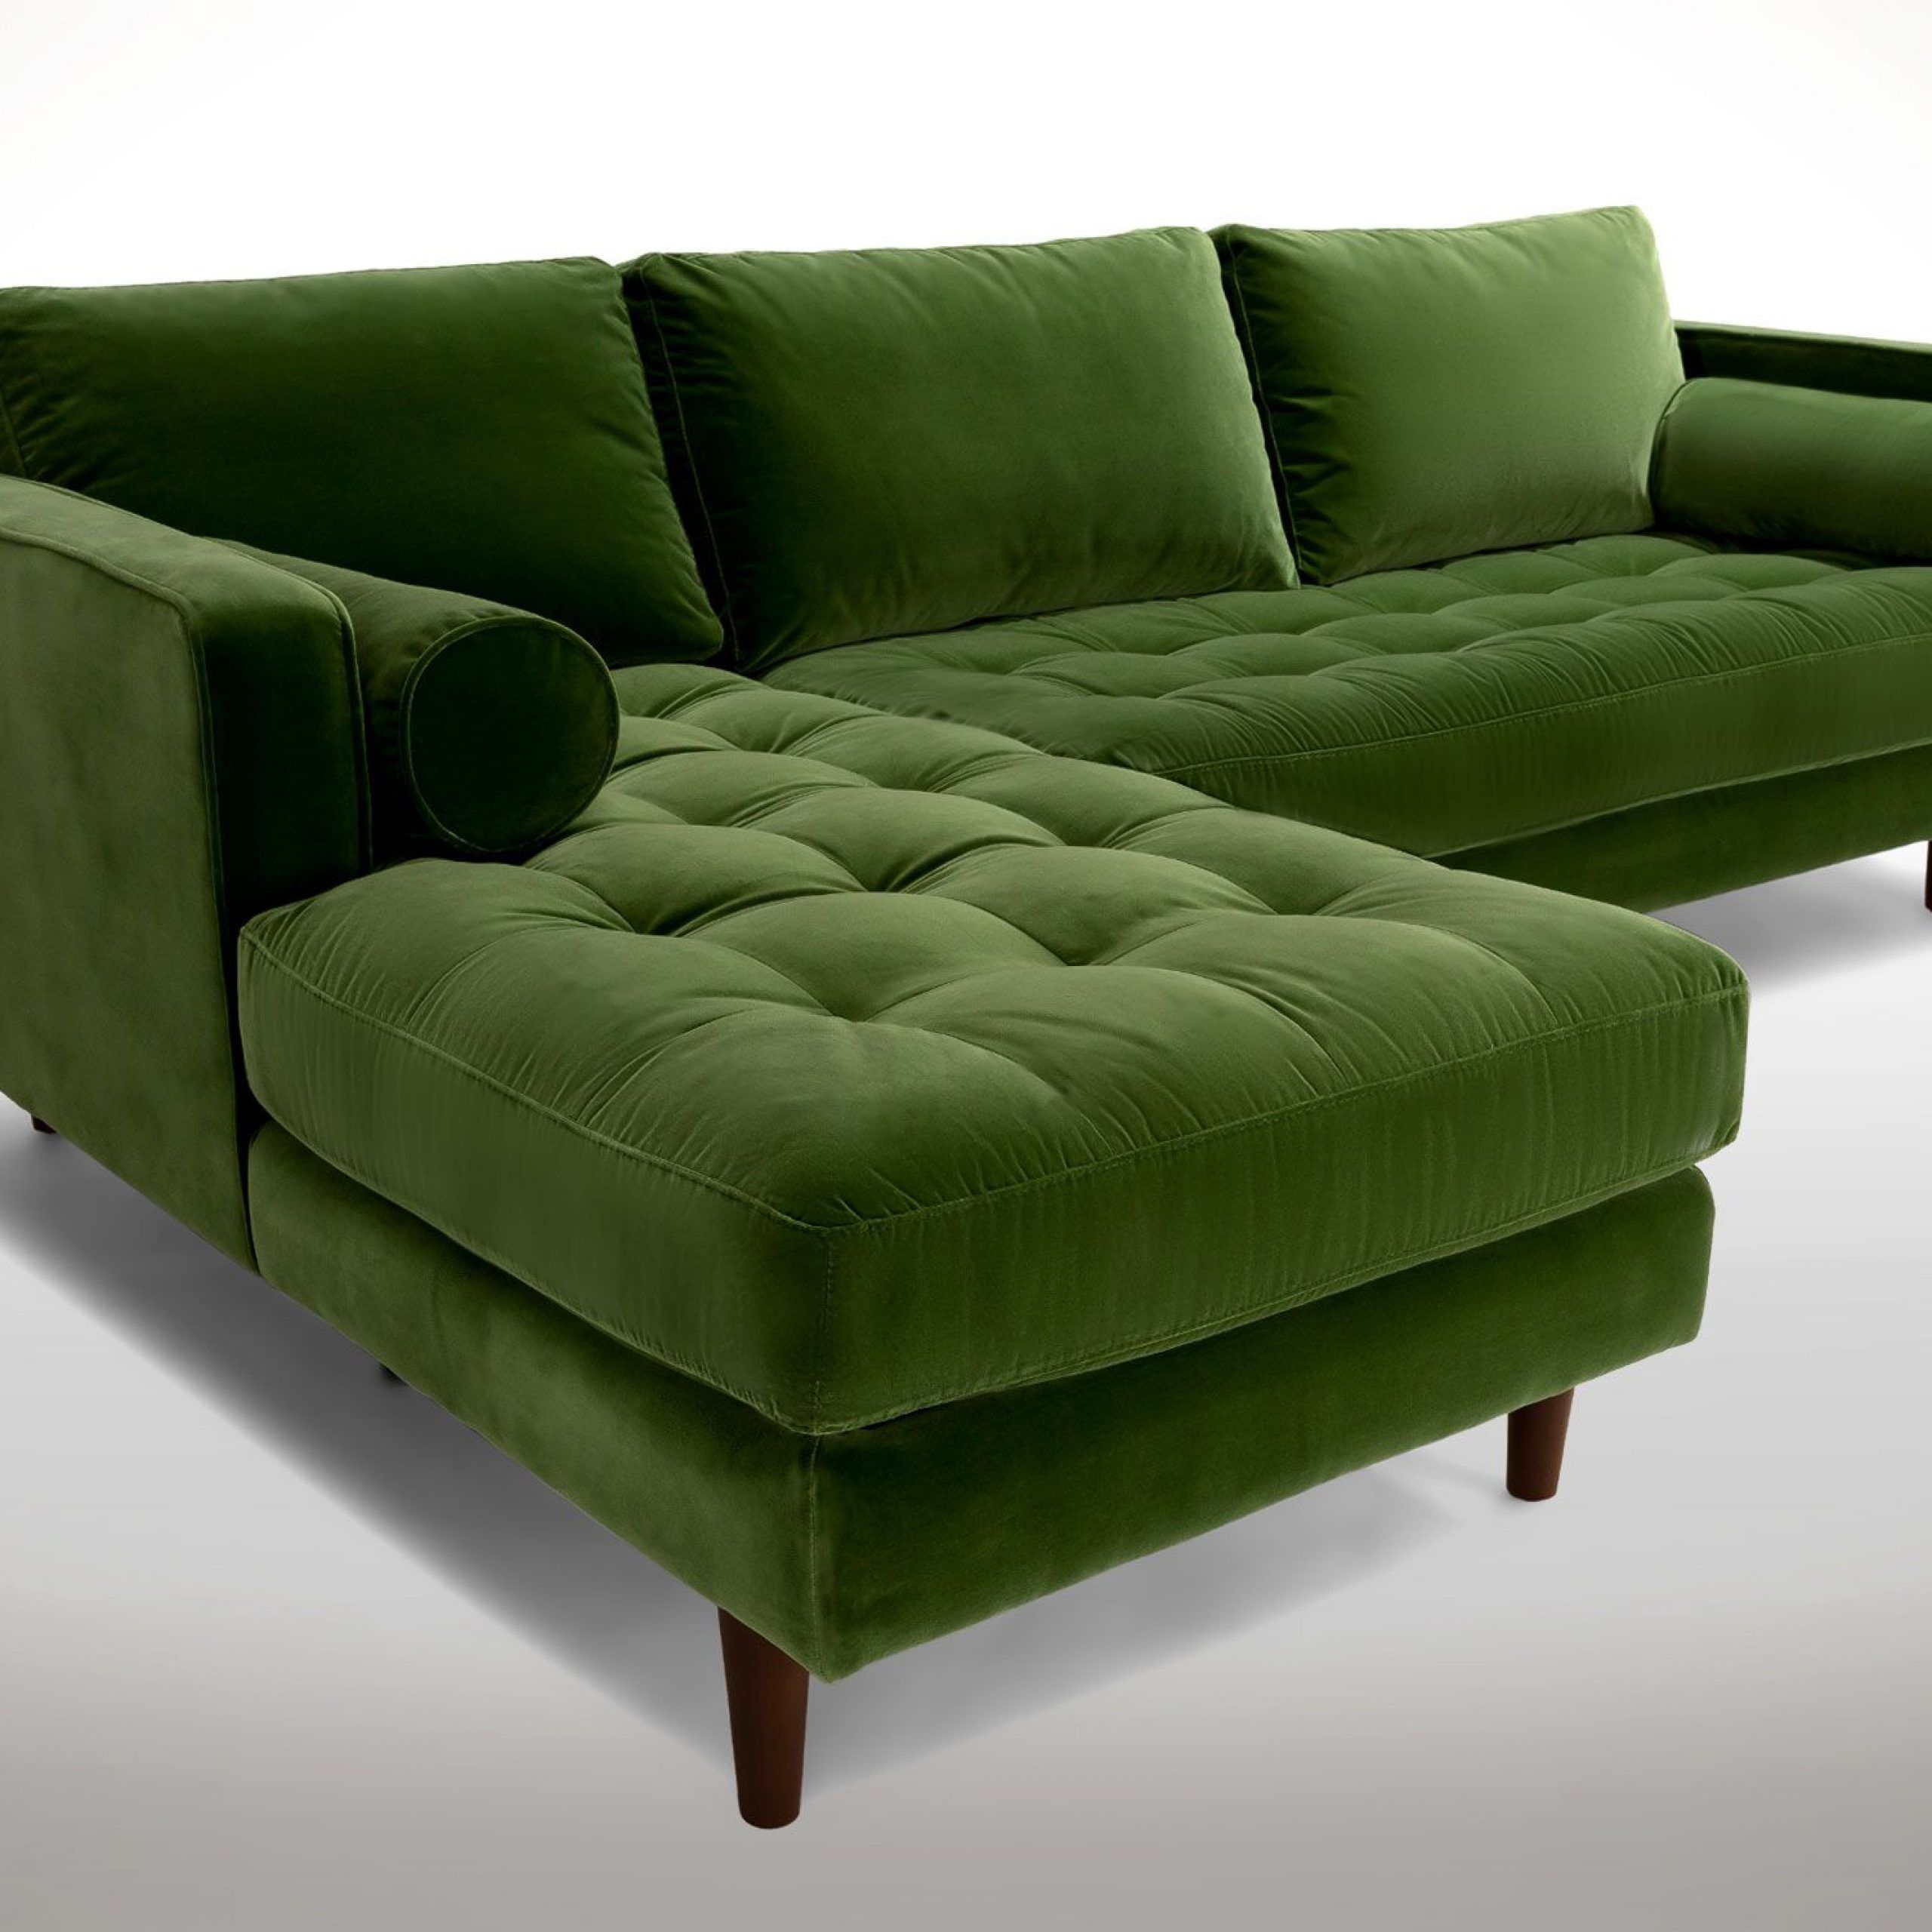 Well Liked Florence Mid Century Modern Velvet Right Sectional Sofas With Sven Grass Green Right Sectional Sofa (View 14 of 25)